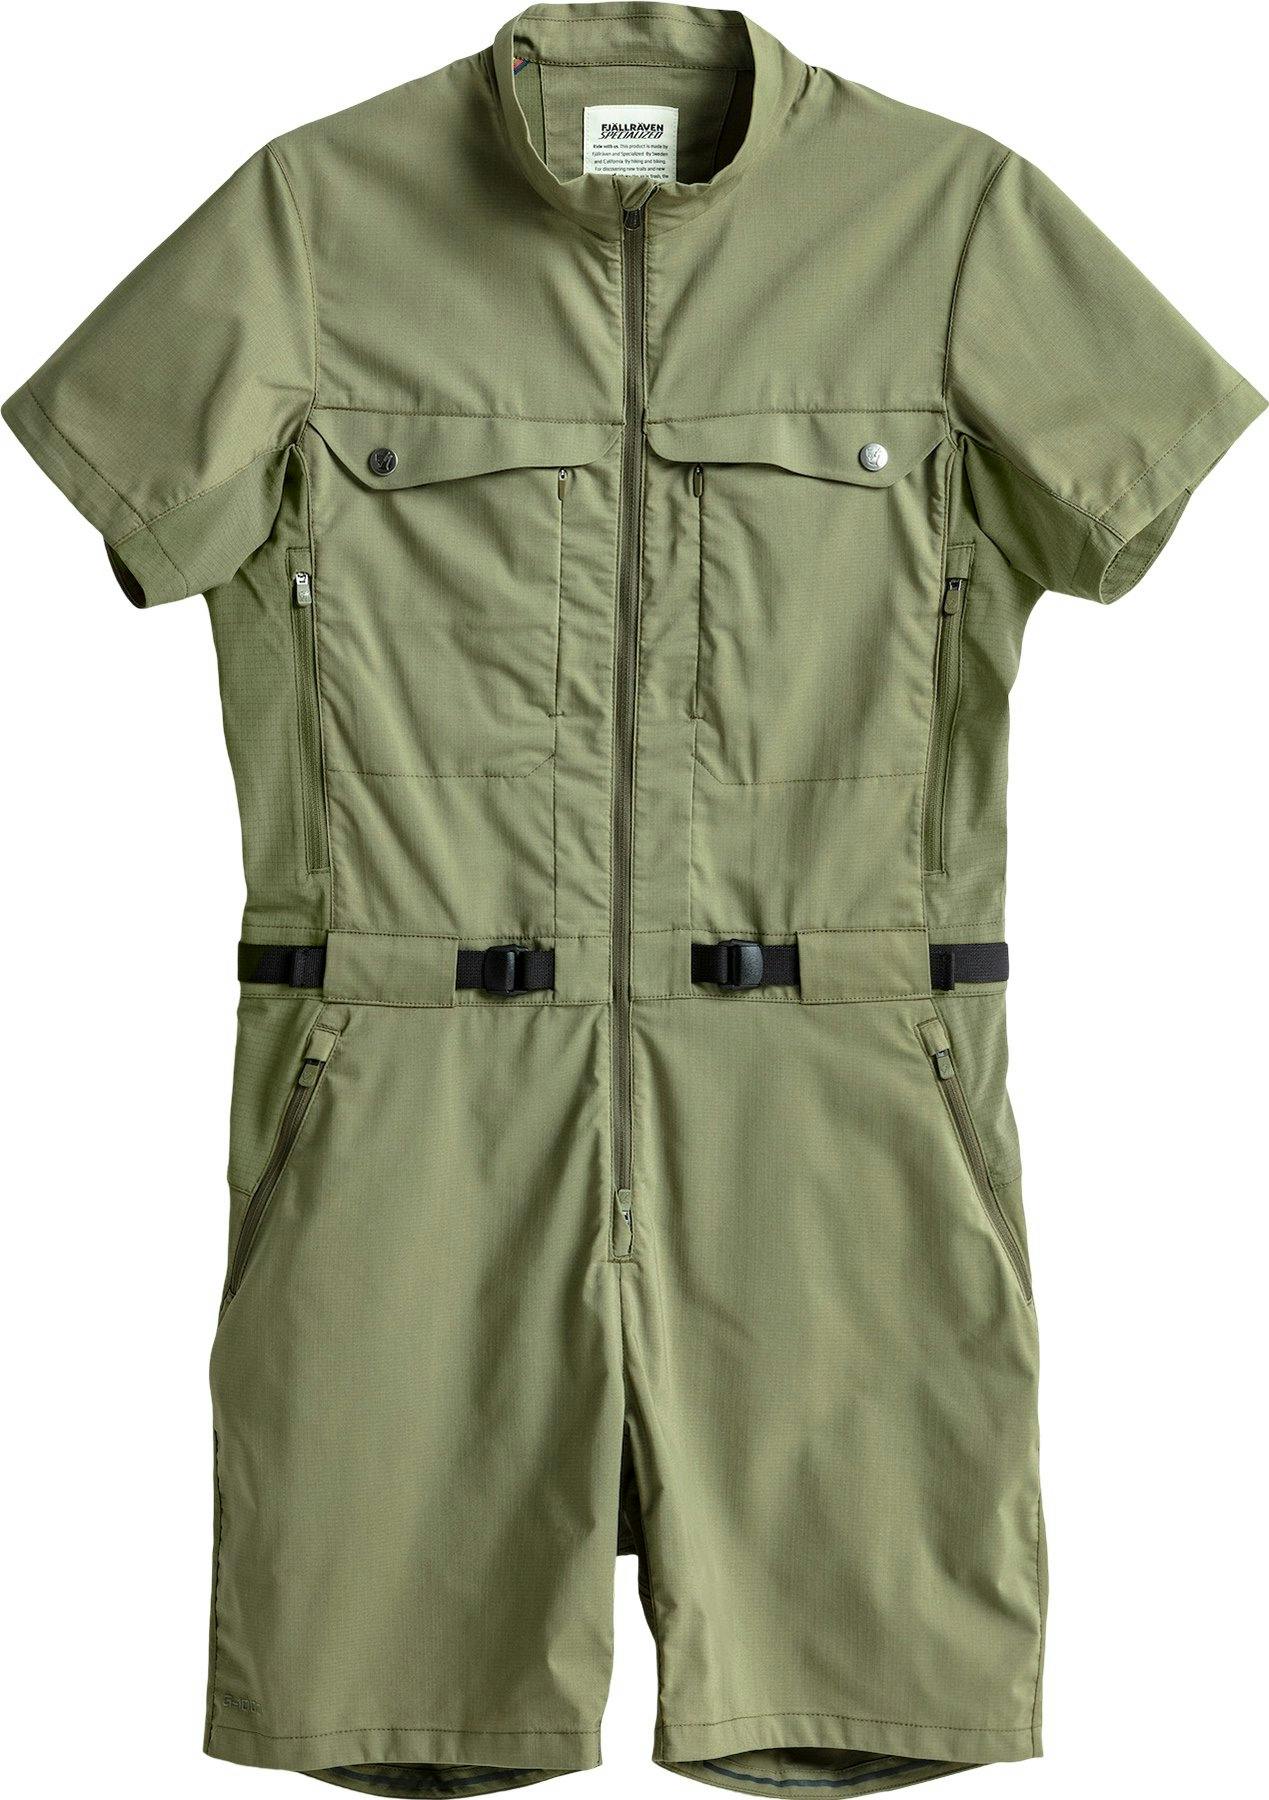 Product image for S/F Sun Field Suit - Women's